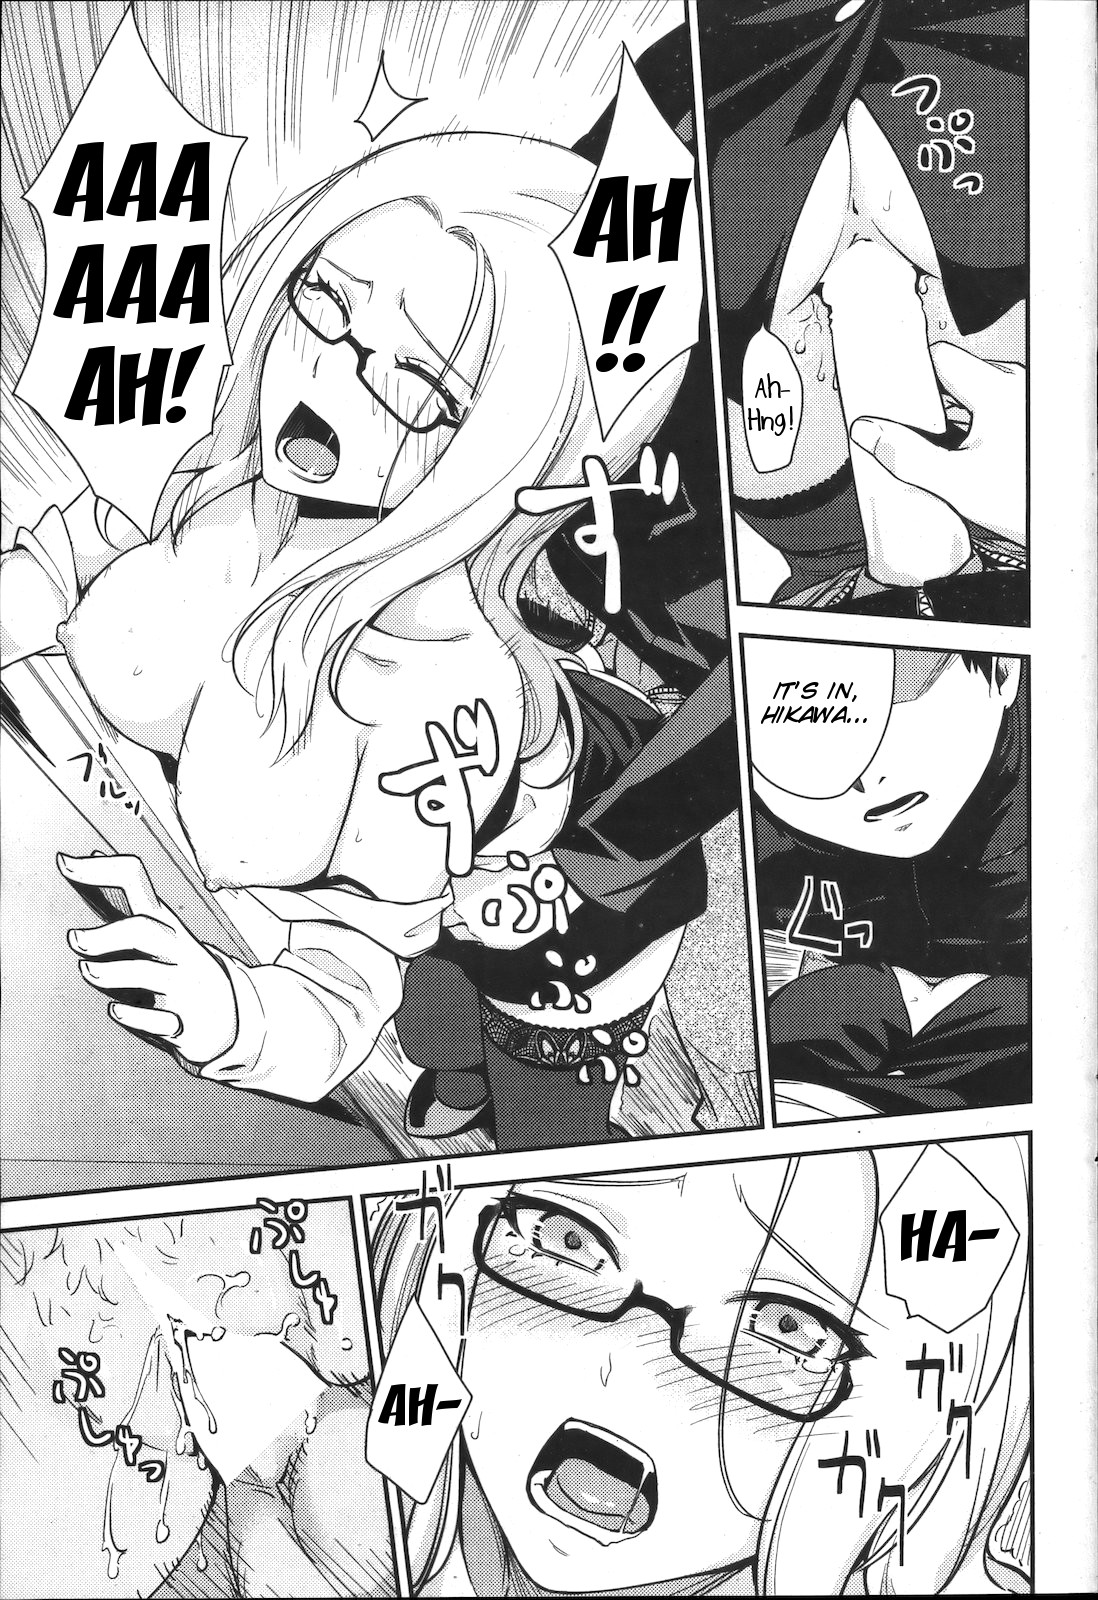 Submissive teacher with glasses gets gangbaned by her class in Benimura Karu - Pushover Hentai Comics